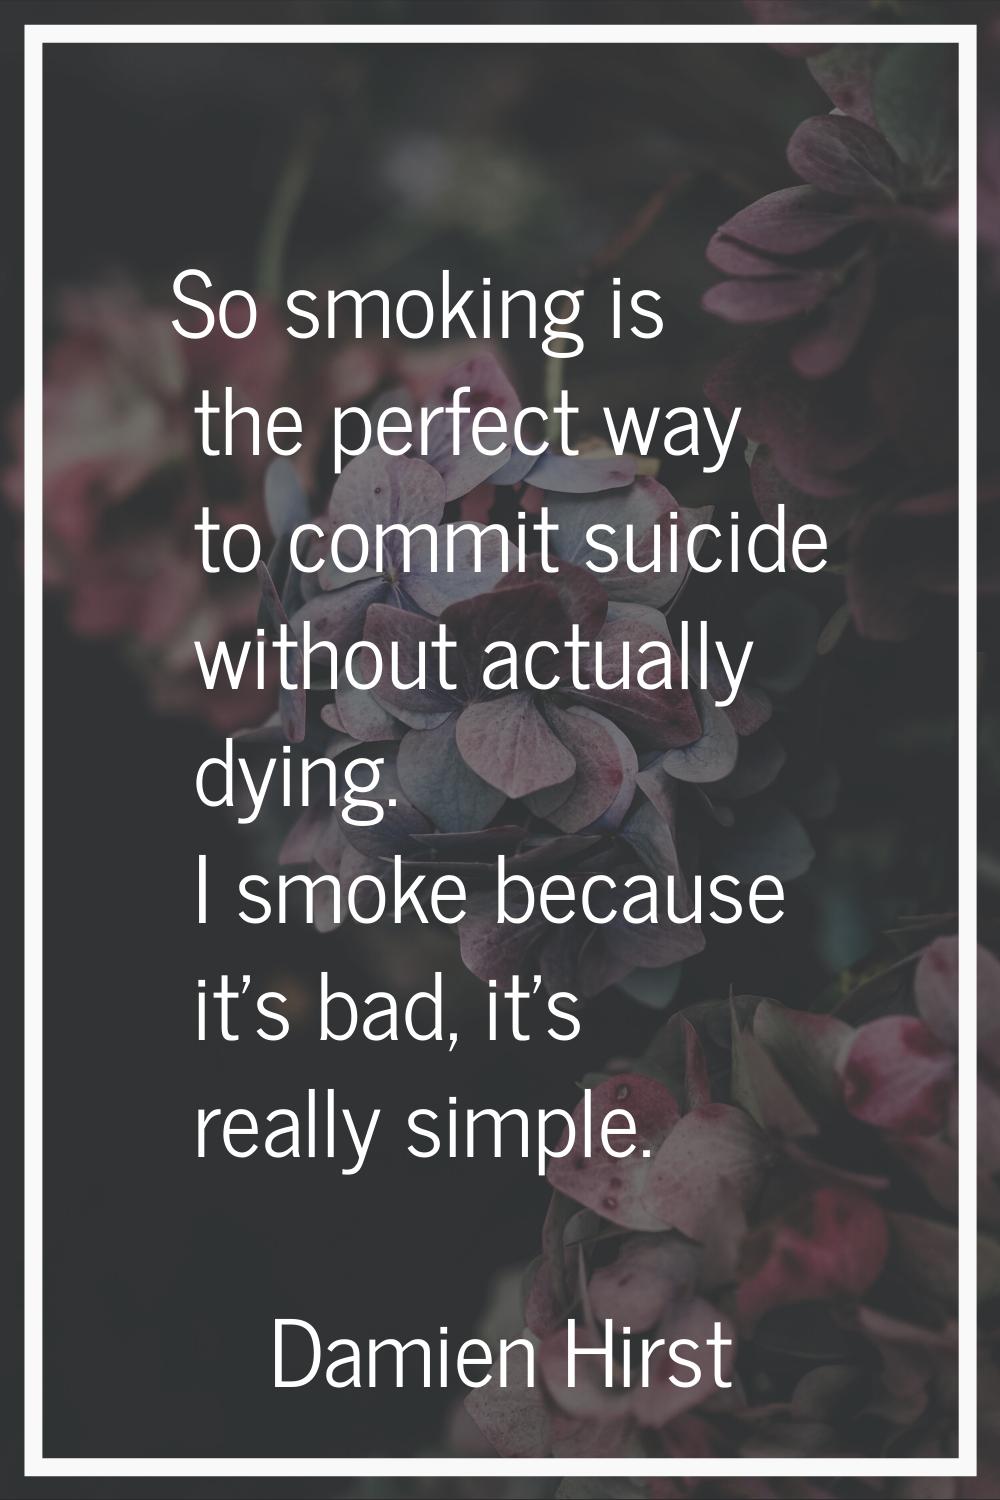 So smoking is the perfect way to commit suicide without actually dying. I smoke because it's bad, i